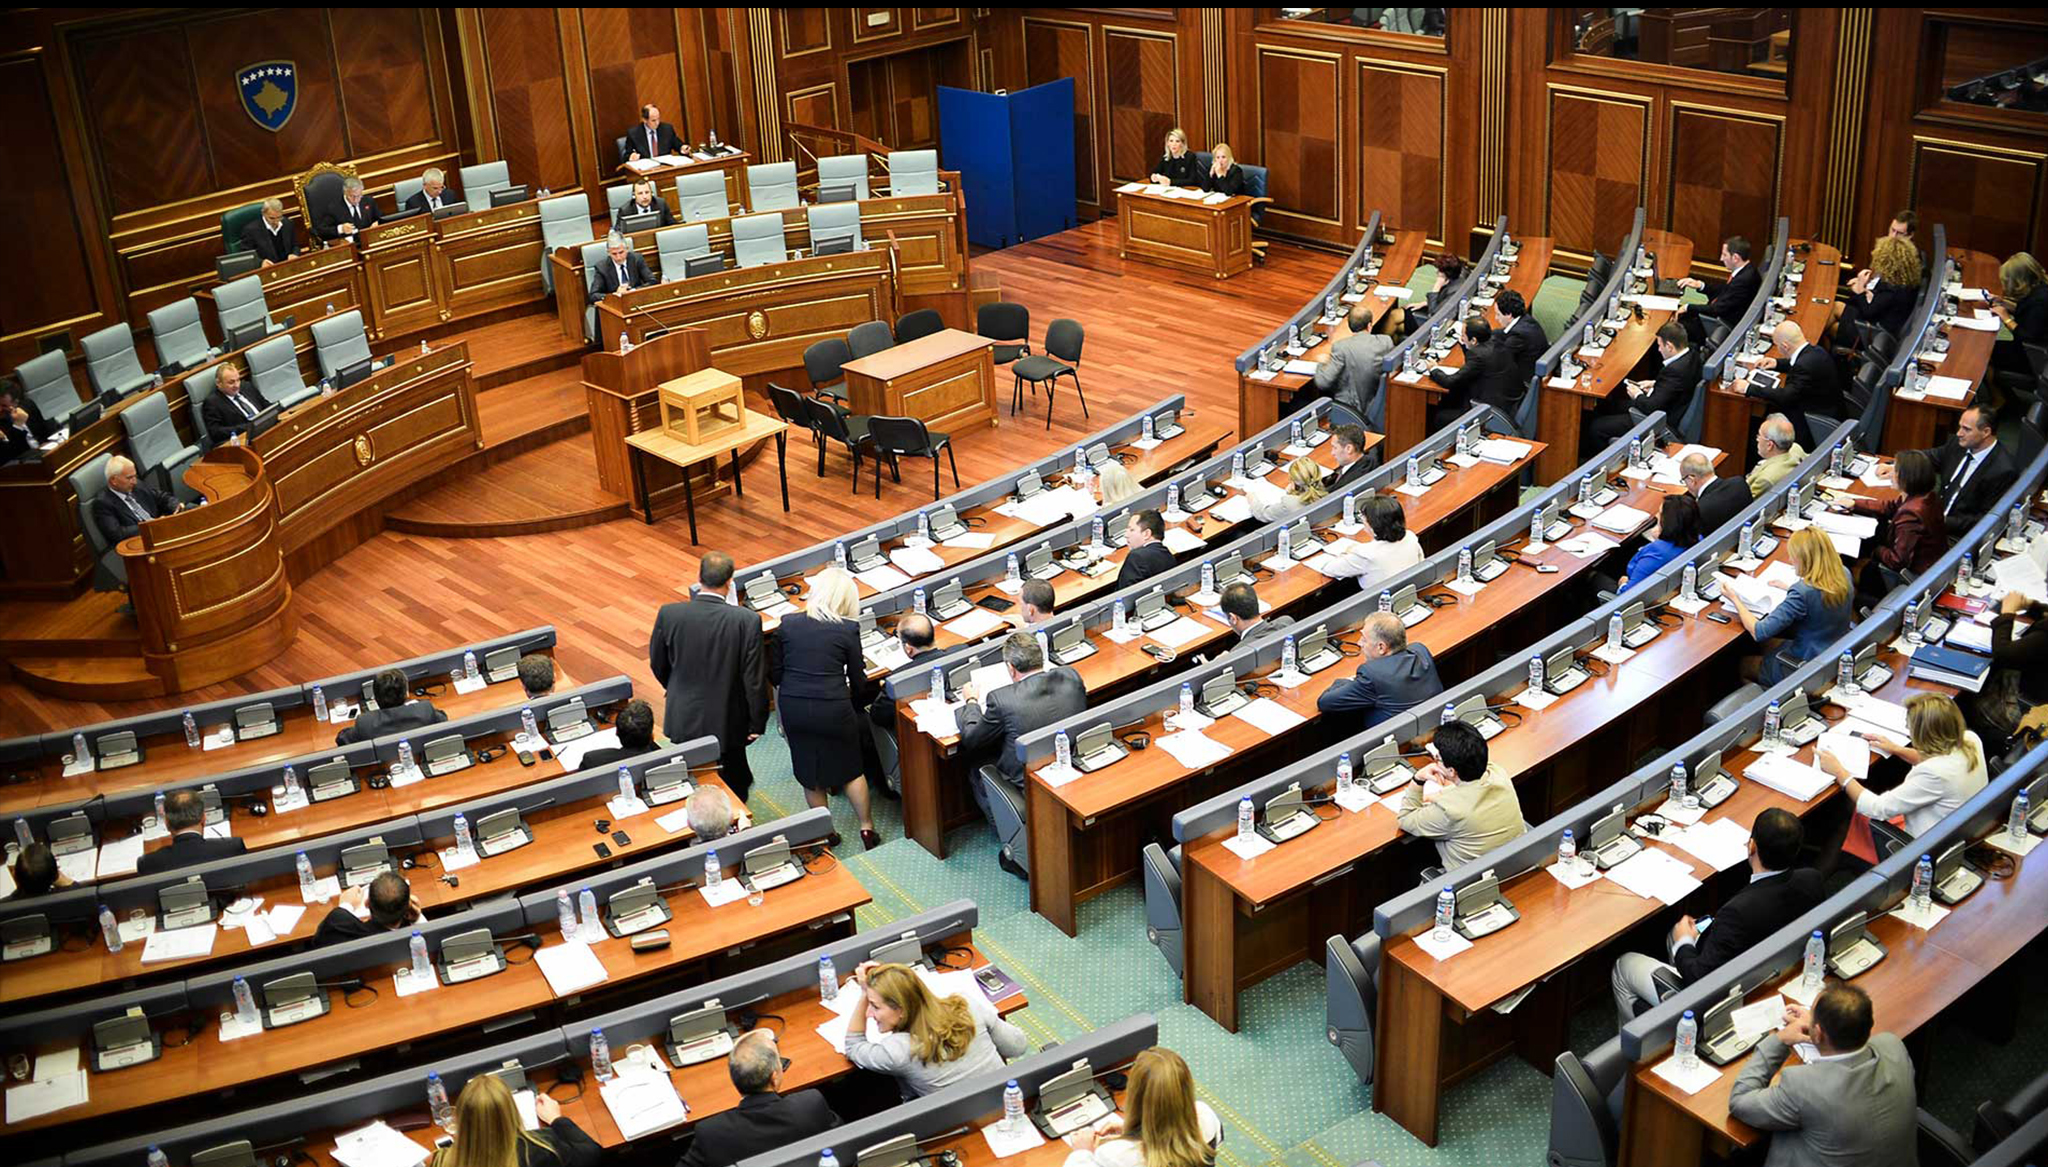 OPENNESS OF THE PARLIAMENT OF KOSOVO AND THE REGION